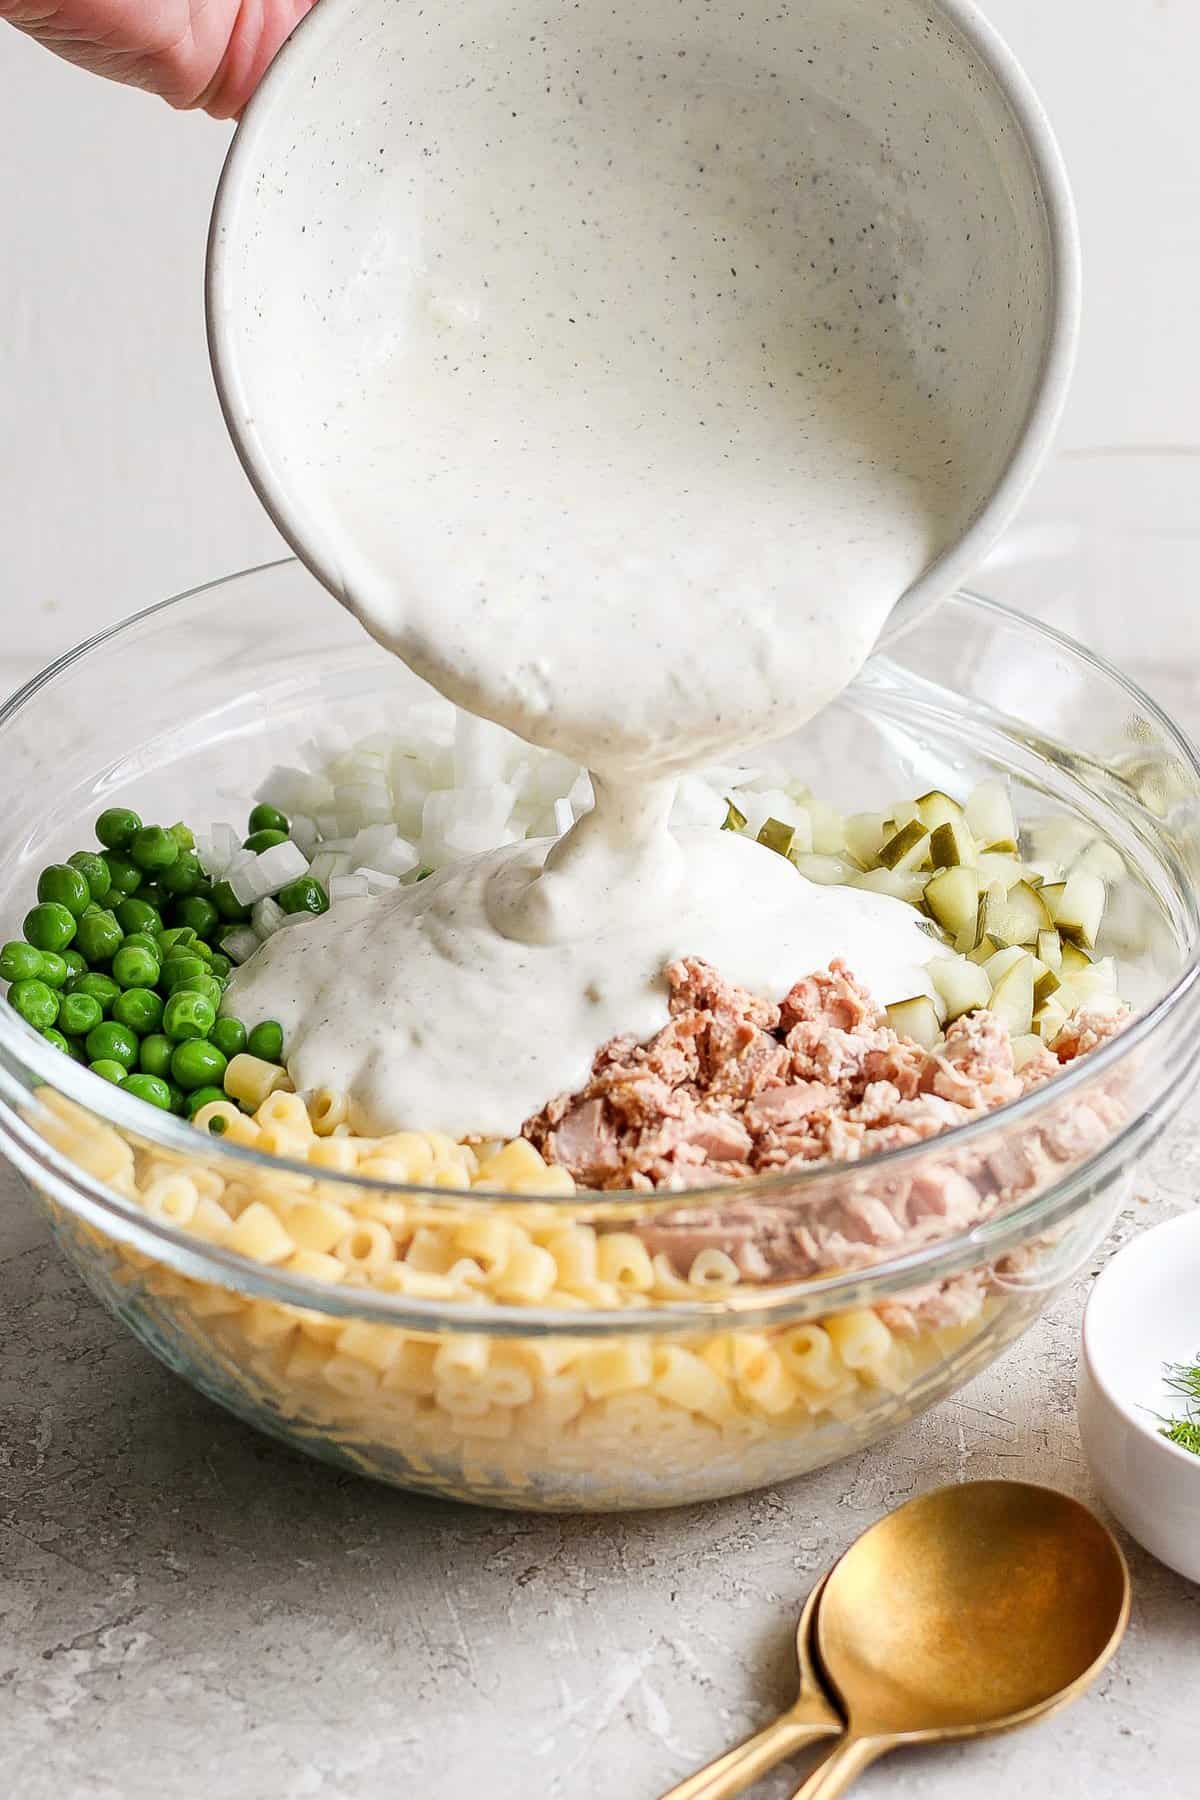 A person pours creamy sauce into a bowl containing macaroni, tuna, chopped onions, and peas for a salad.